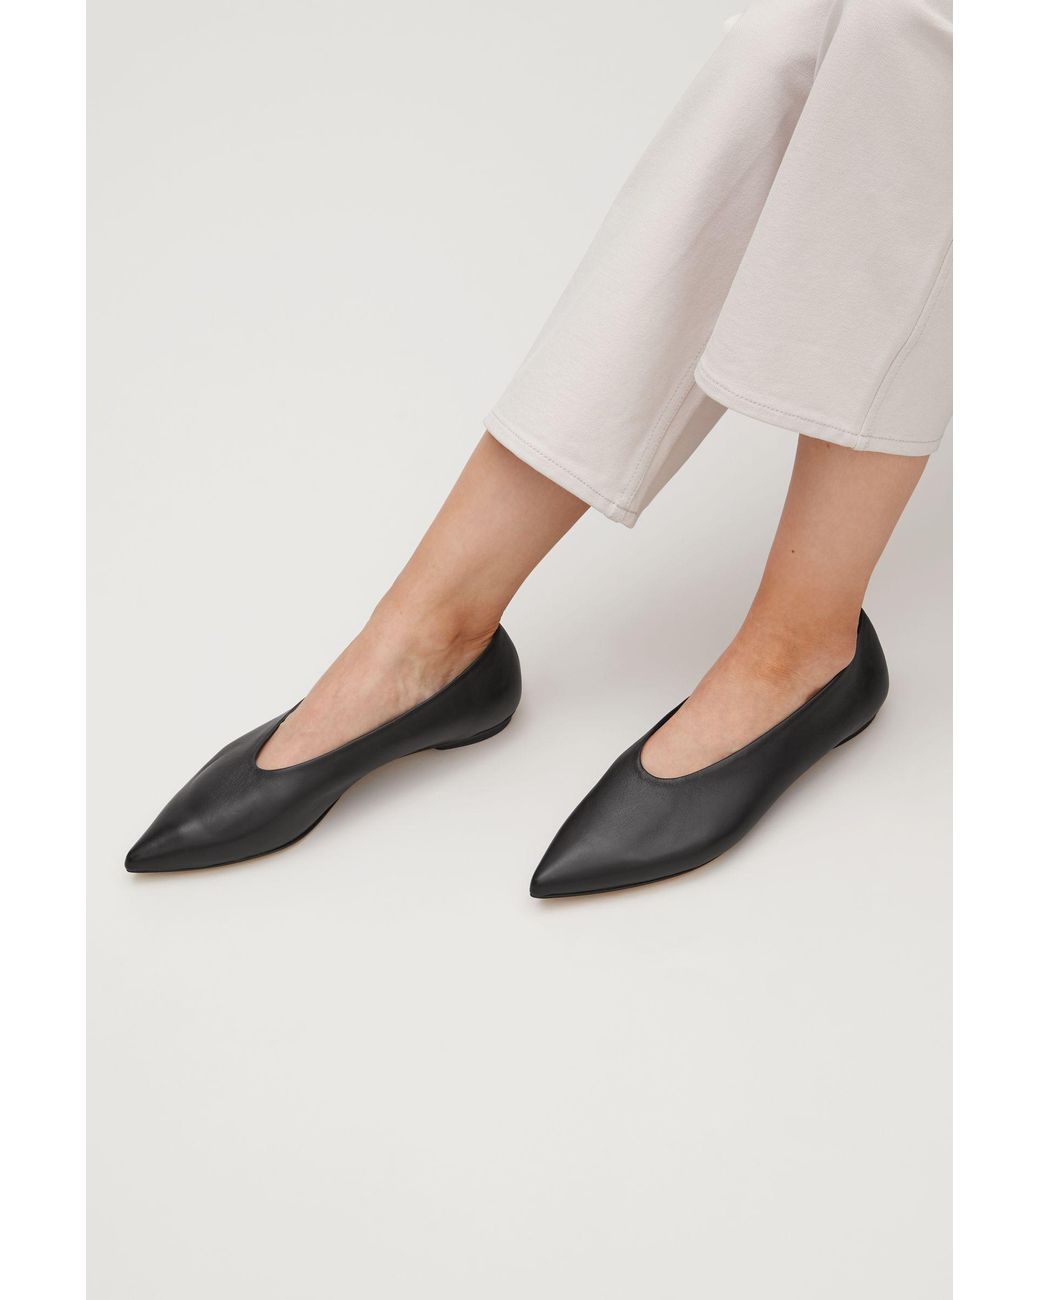 COS Pointed Slip-on Shoes in Black | Lyst